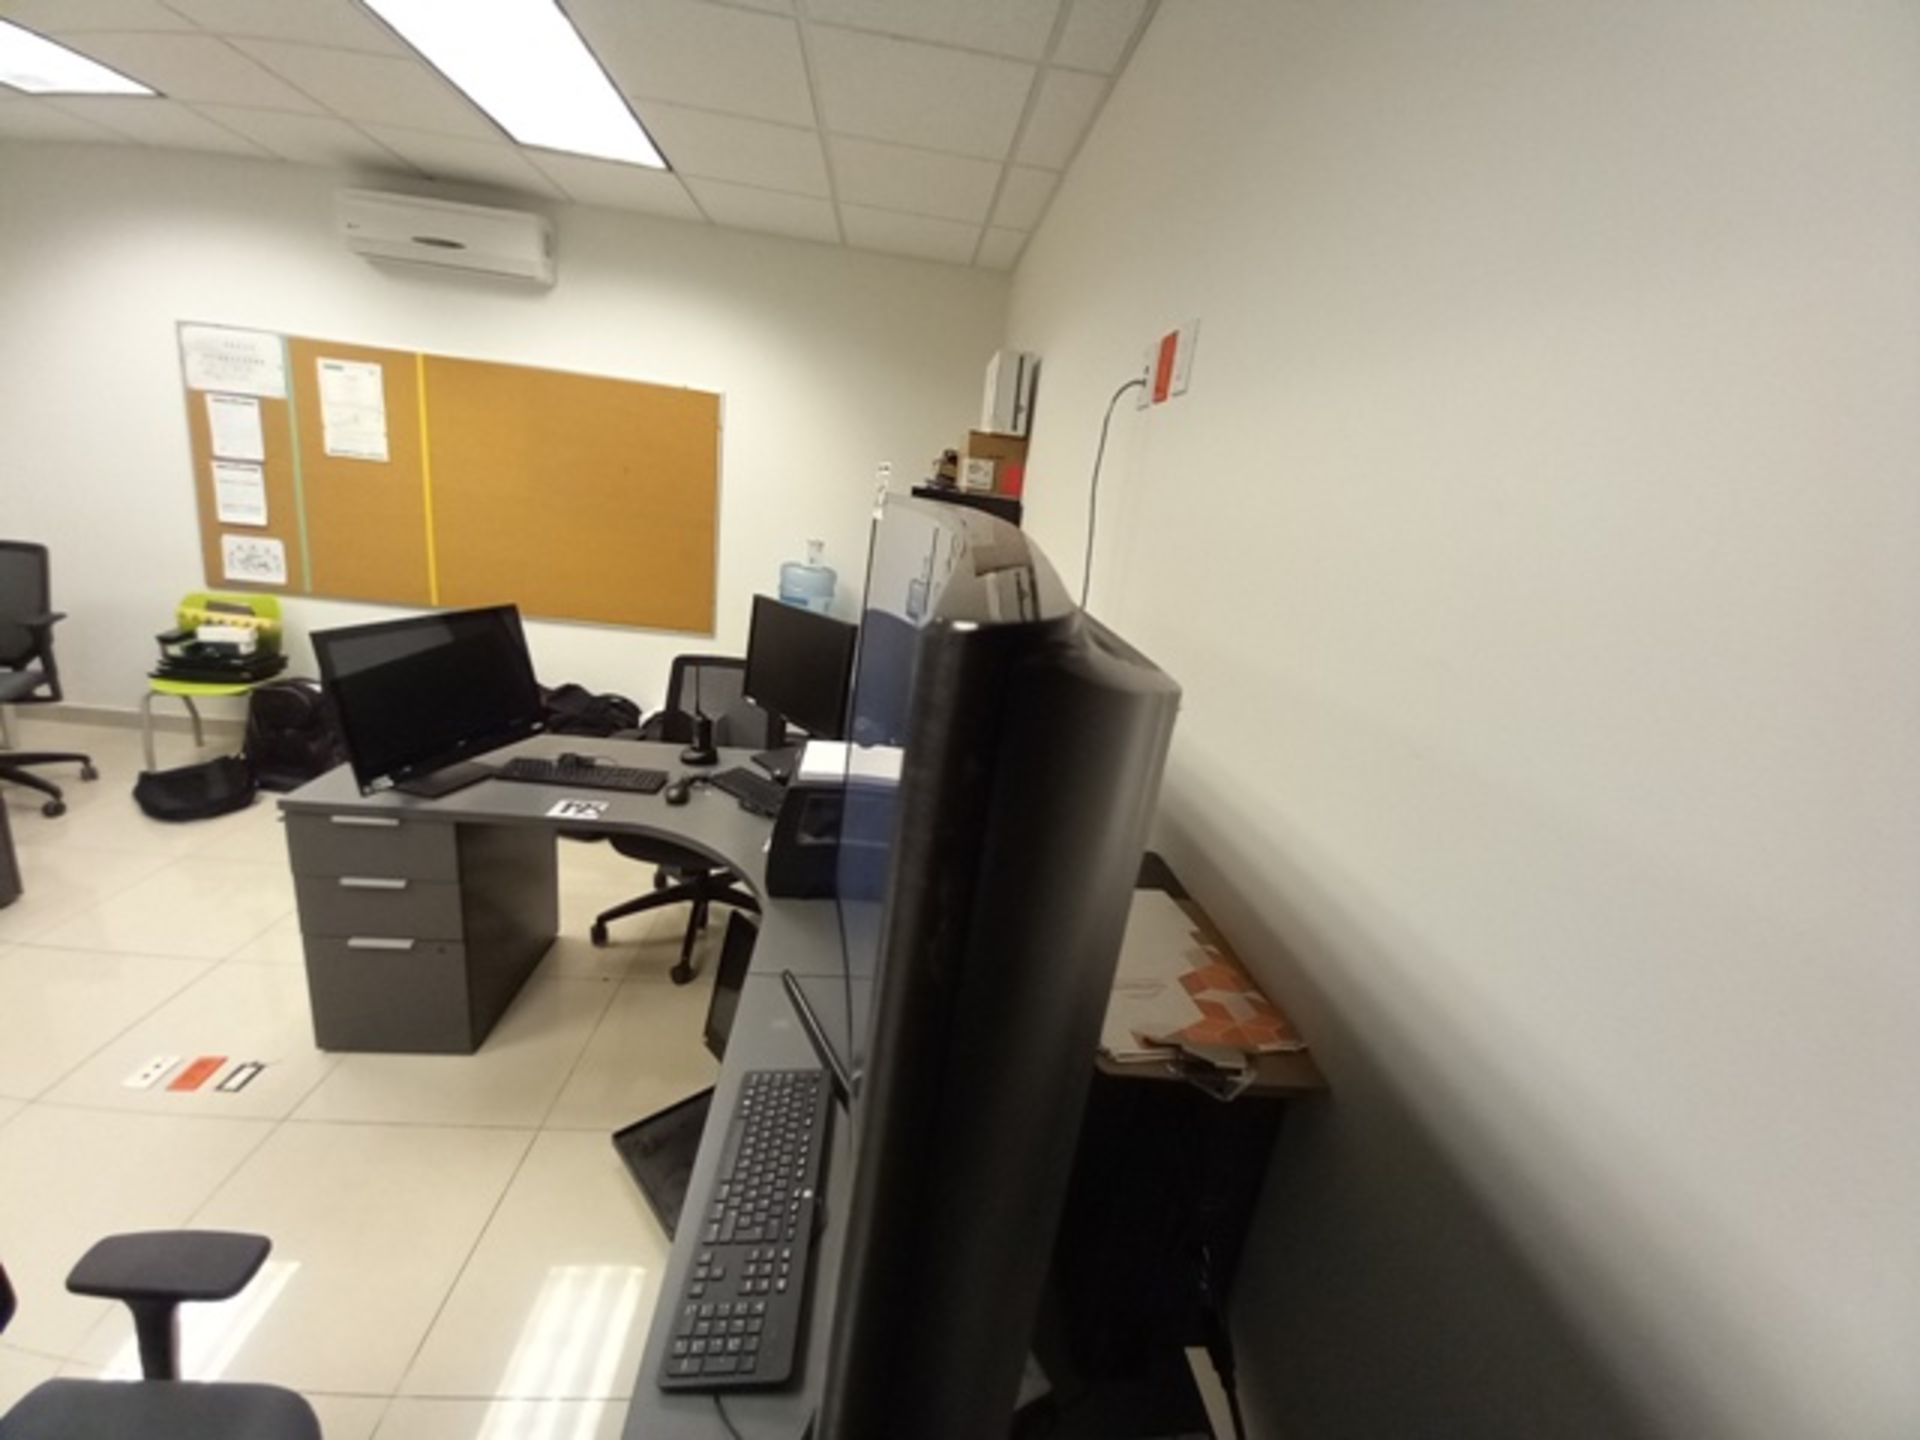 (29) Pcs Office Furniture and Computer Equipment Consisting of: (2) 2 Person Work Stations and more - Image 3 of 33